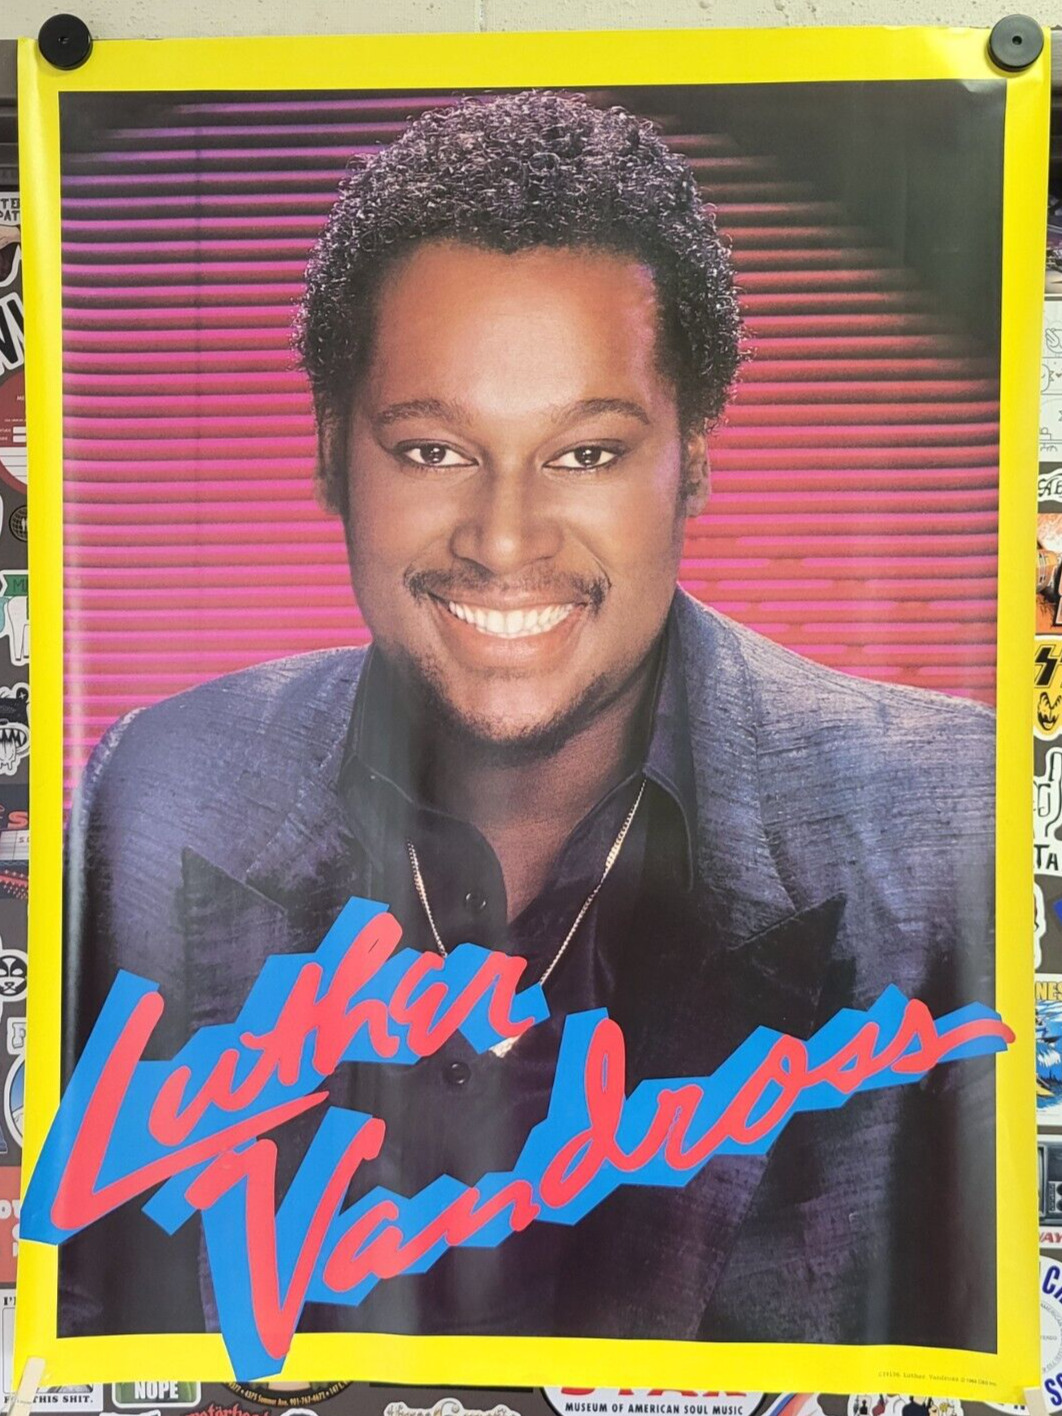 Luther Vandross 1983 - Estate Collection Vintage Record Store Promo Poster 24x32